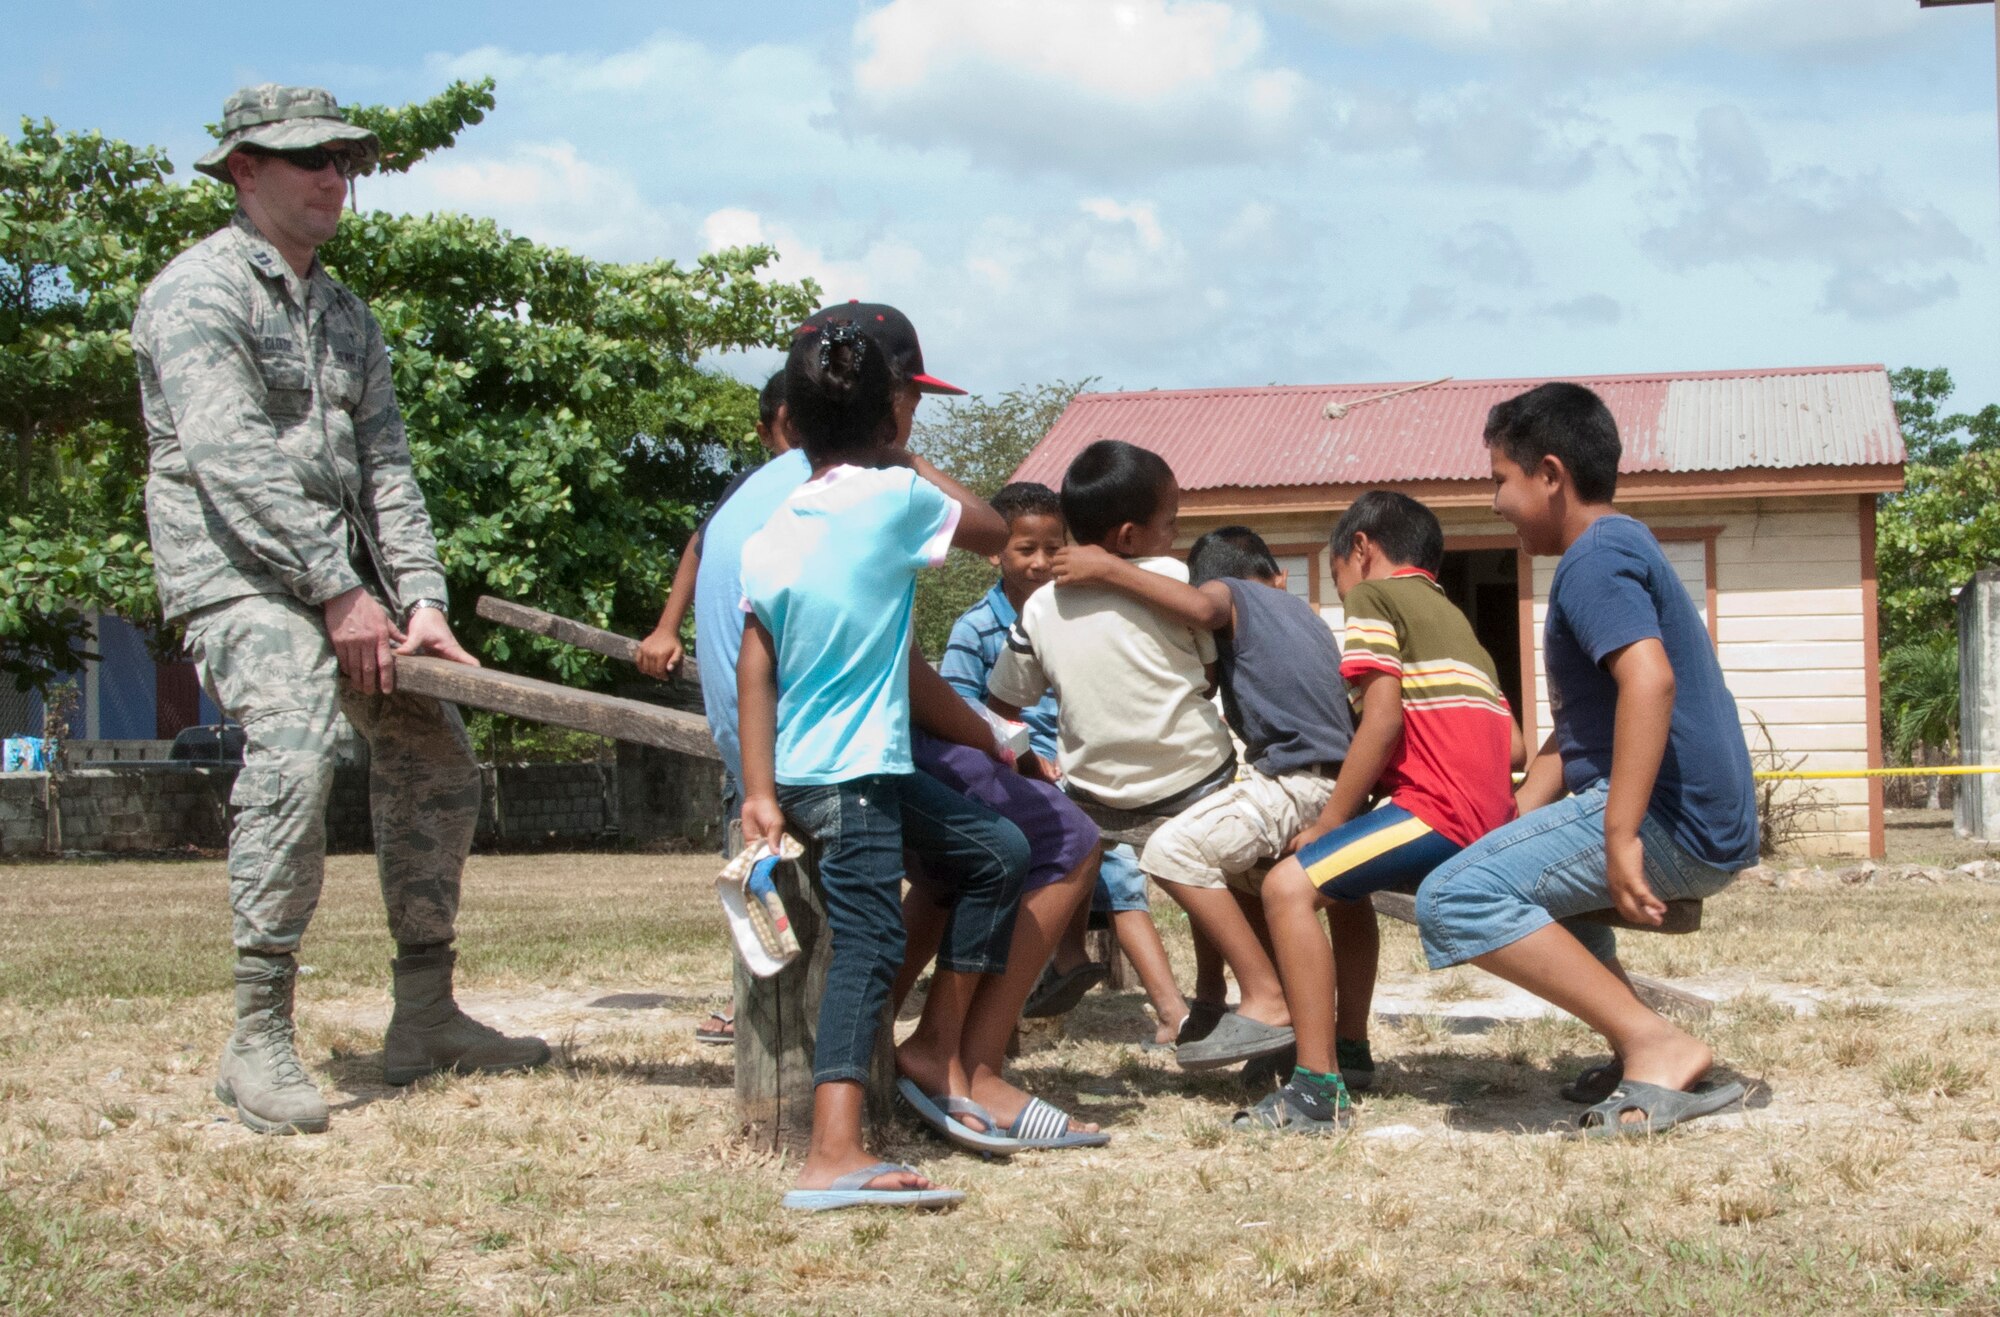 U.S. Air Force Chaplain (Capt.) Matthew Clouse, right, plays on a seesaw with Belizean children while they wait with their parents to receive medical care during a New Horizons Belize 2014 medical readiness training exercise, or MEDRETE, April 11, 2014, in Progresso, Belize. Clouse is supporting service members of New Horizons Belize 2014 as the team's chaplain. He is charged with meeting the spiritual needs of the more than 400 U.S. military members deployed in support of the exercise. (U.S. Air Force photo by Tech. Sgt. Kali L. Gradishar/Released)